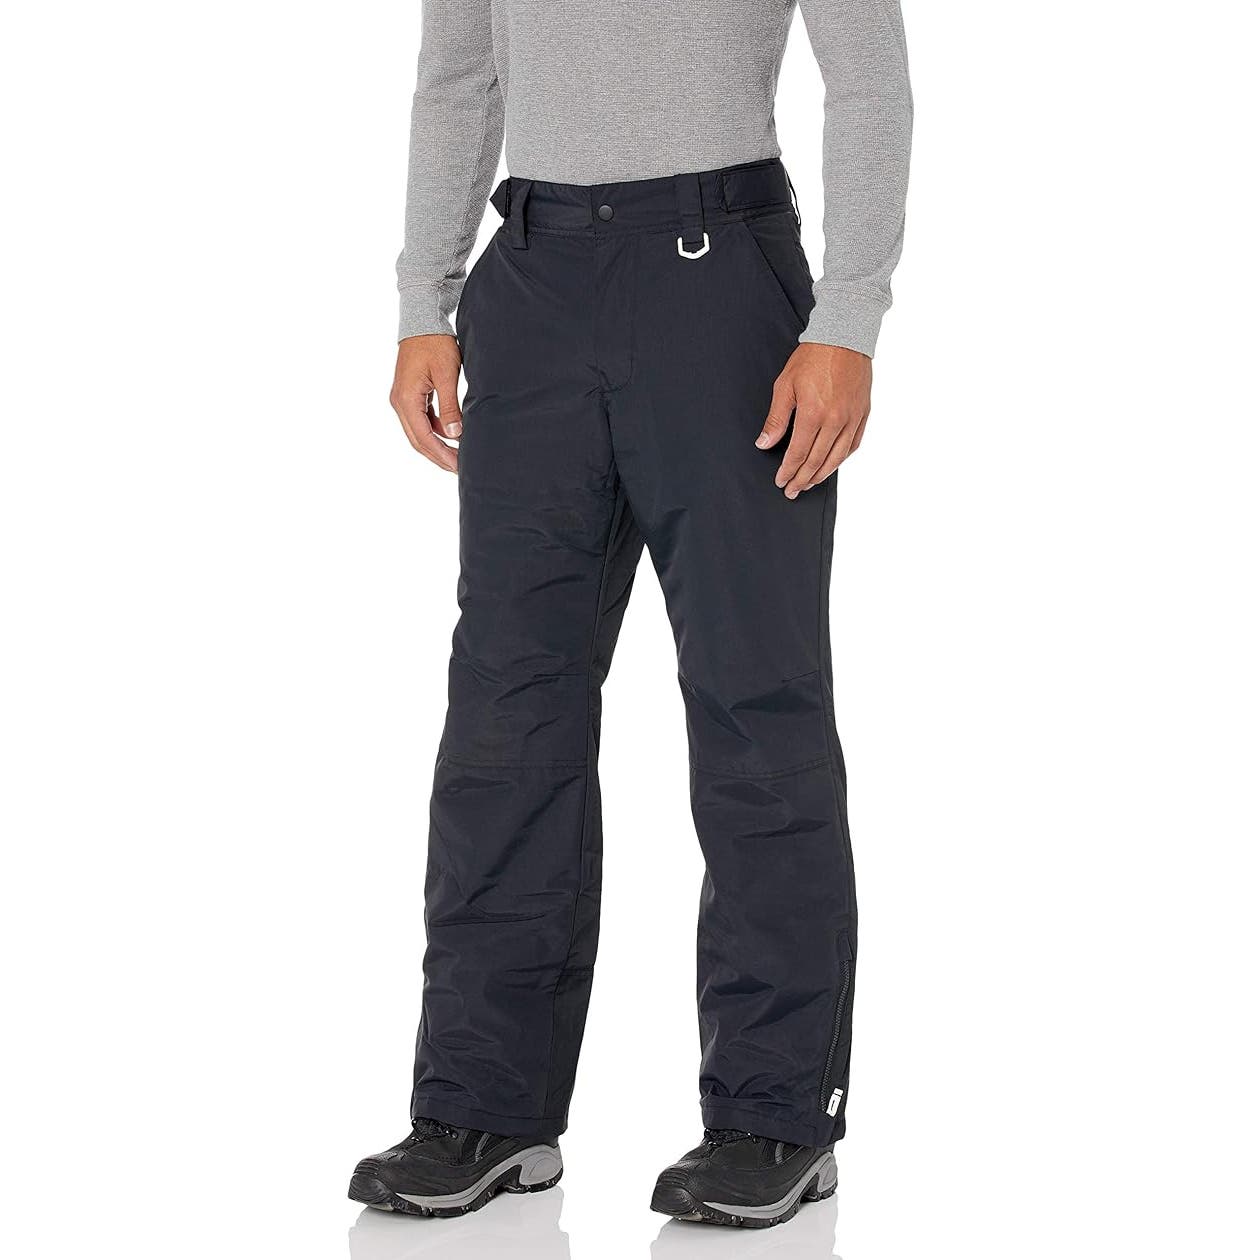 Men's Water-Resistant Insulated Snow Pants, Black, Small, Waist 31.5 in.